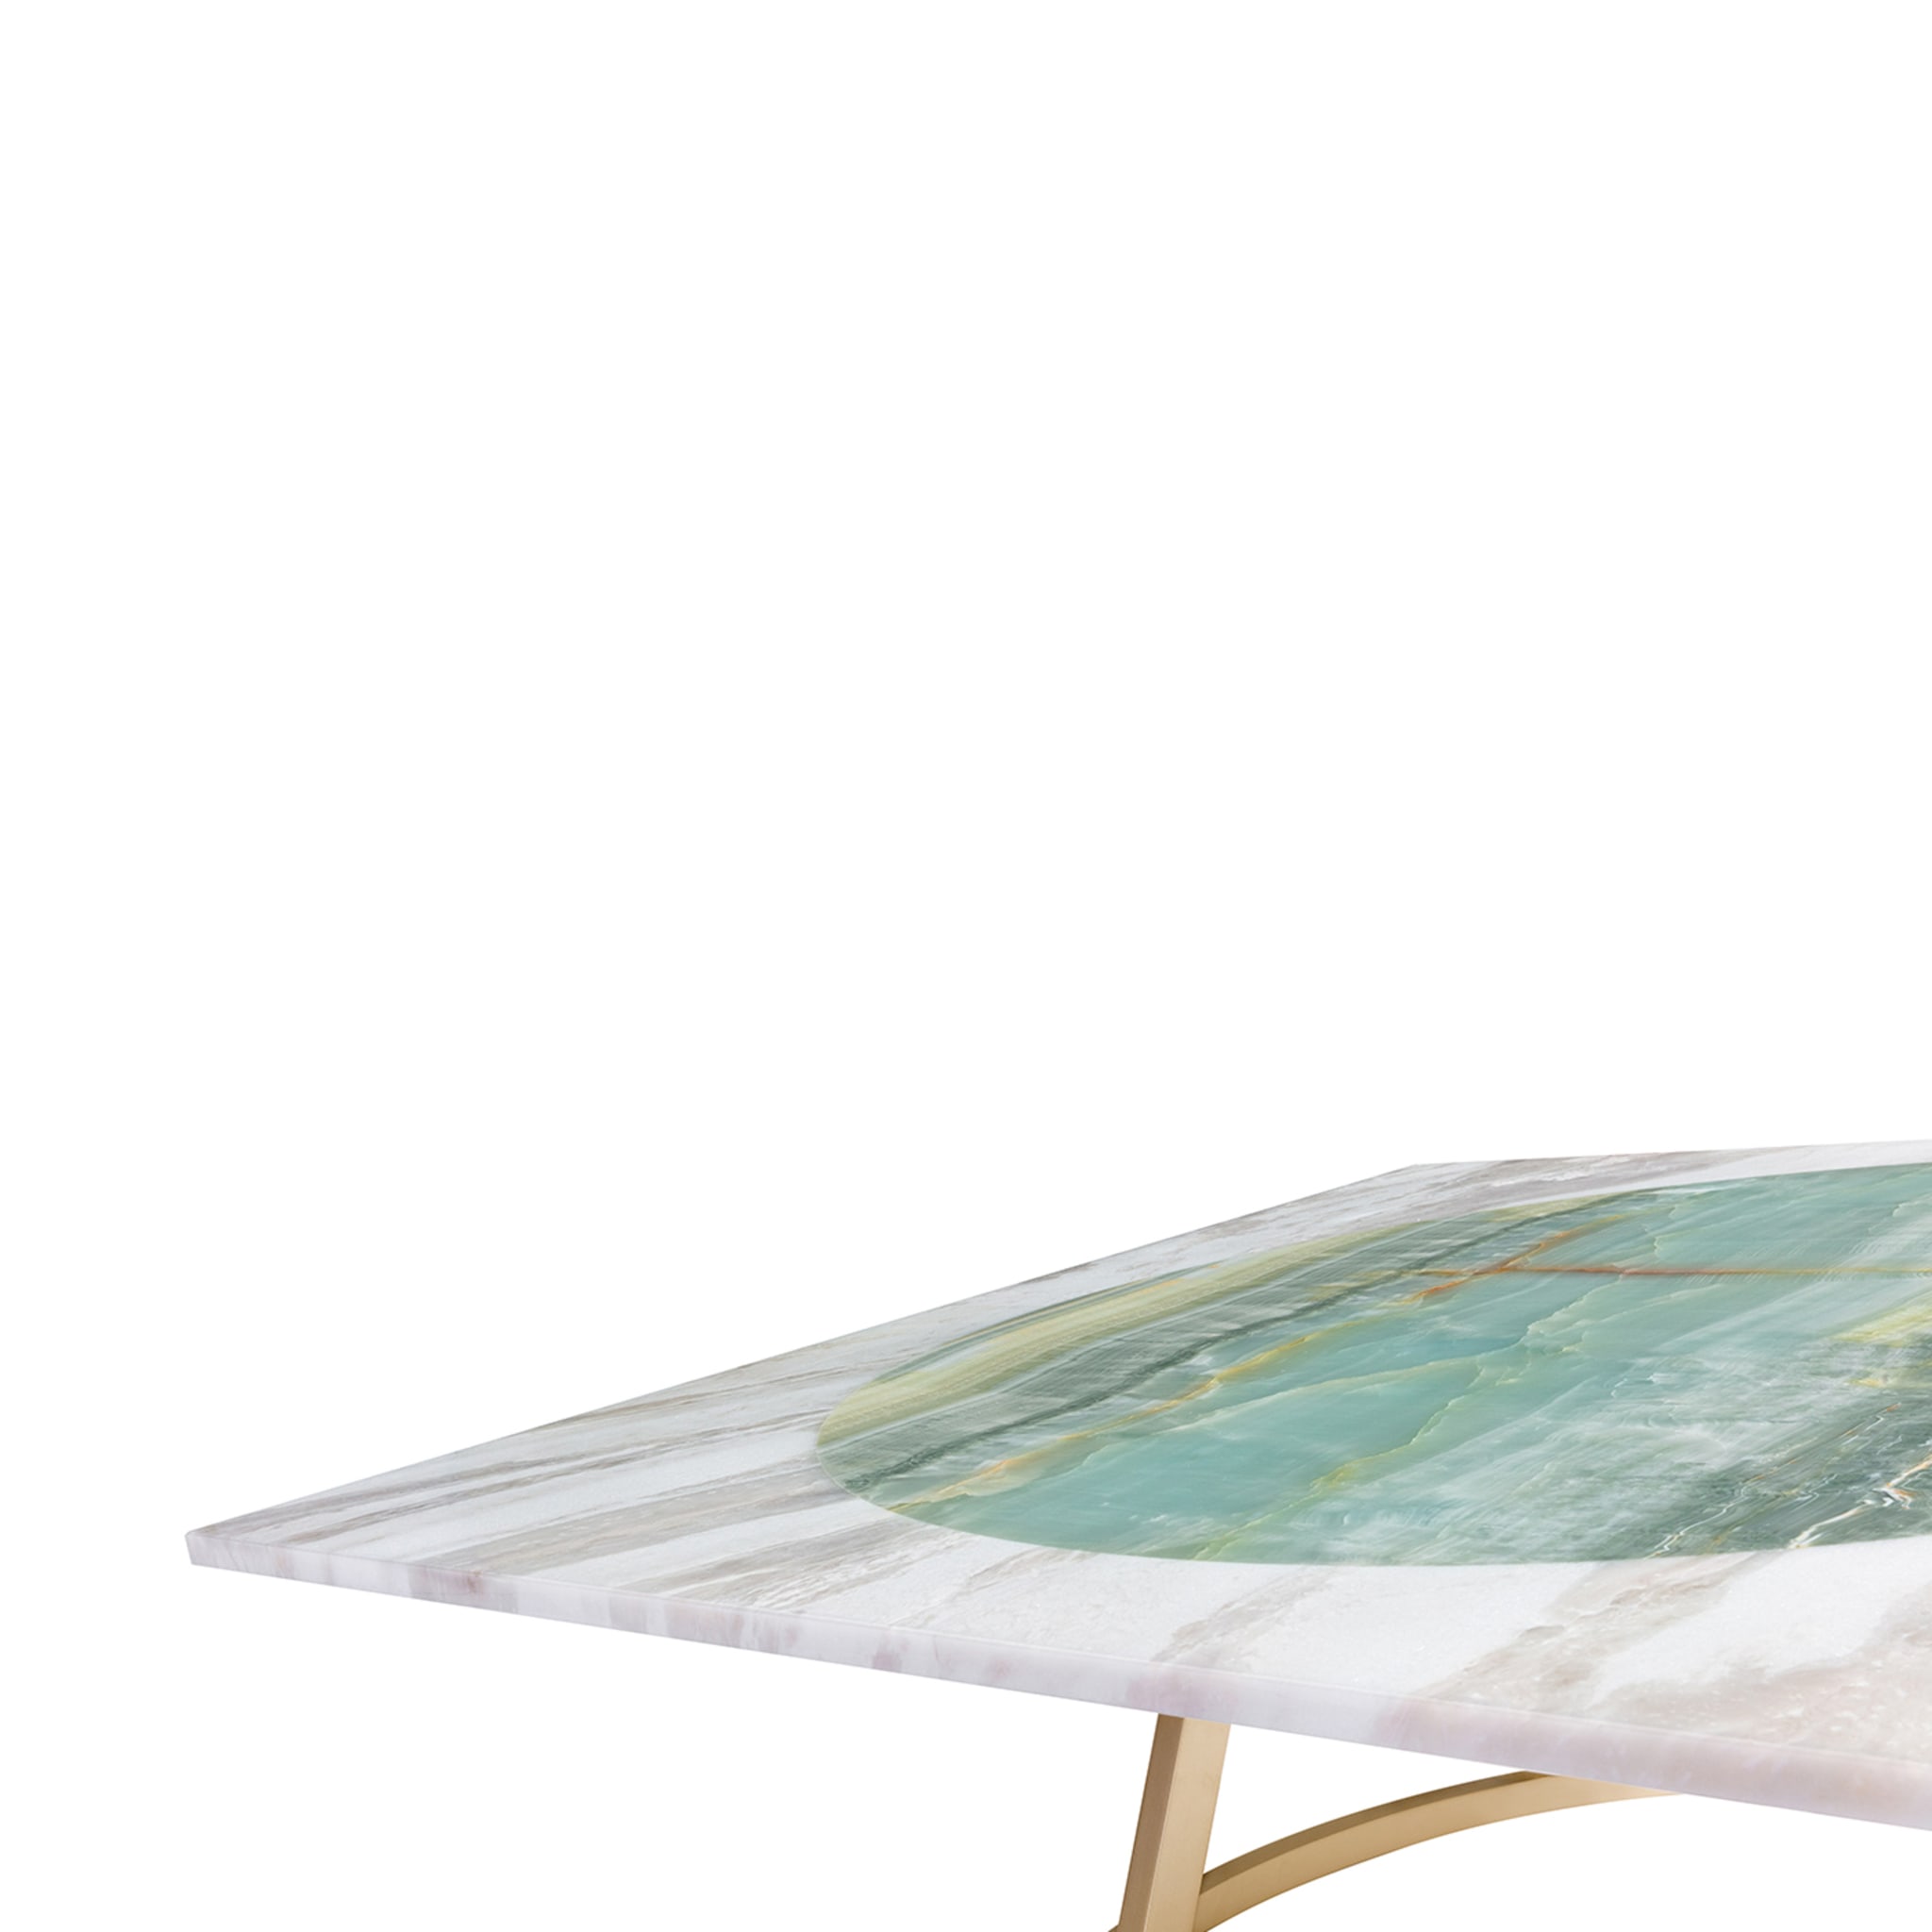 Pantheon Square Polychrome Coffee Table by Maarten De Ceulaer - Alternative view 2